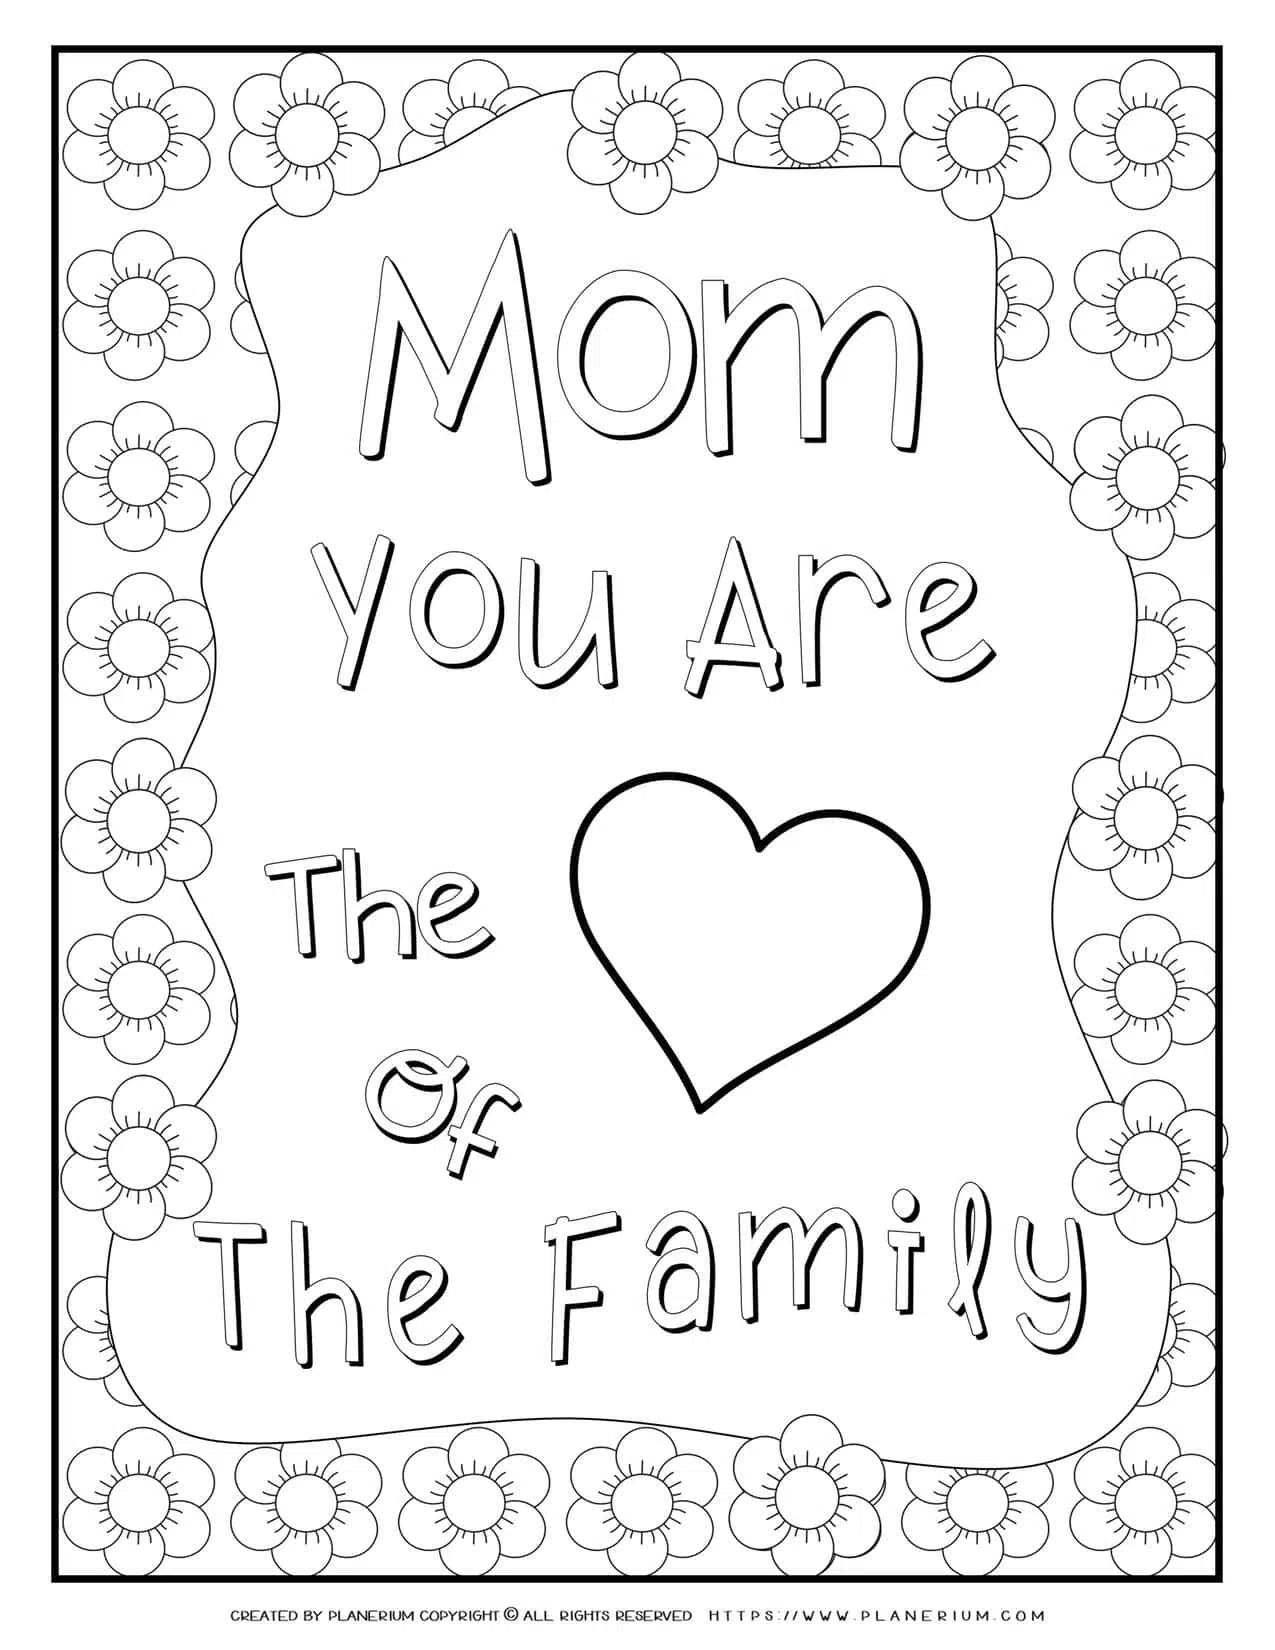 Mother's Day - Coloring Page - Mom You Are The Heart of the Family | Planerium